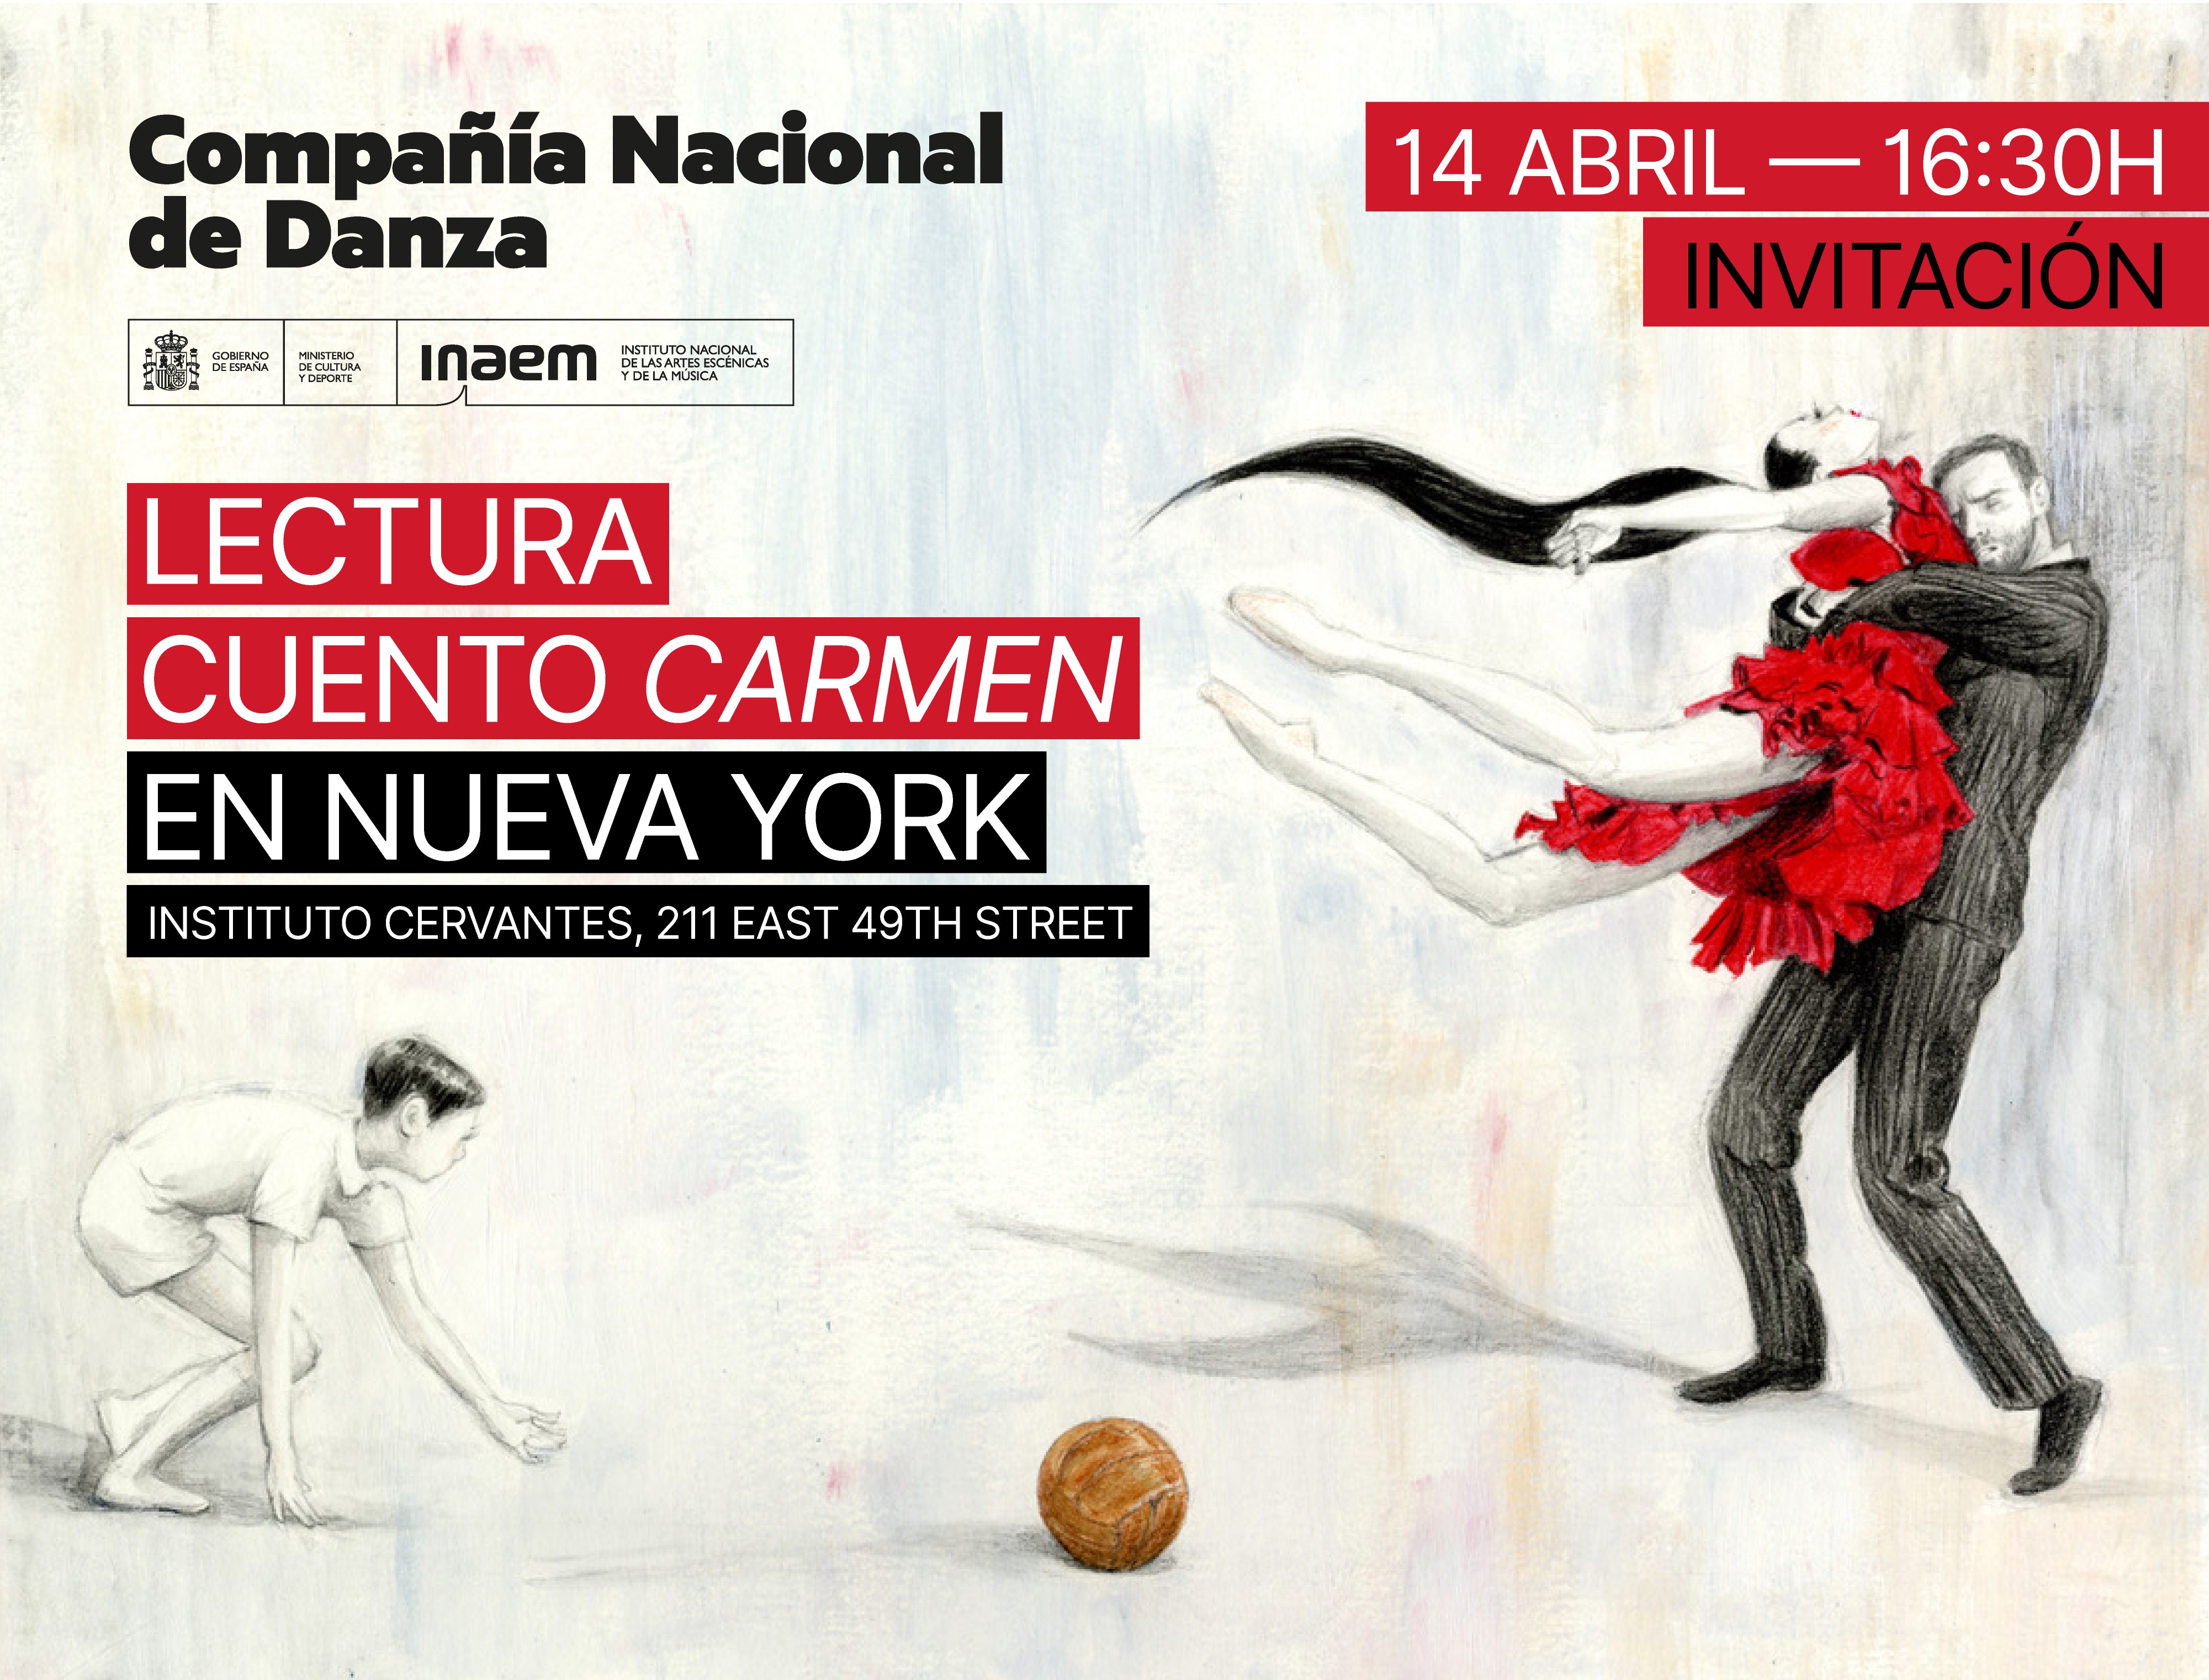 Carmen for children by the National Dance Company